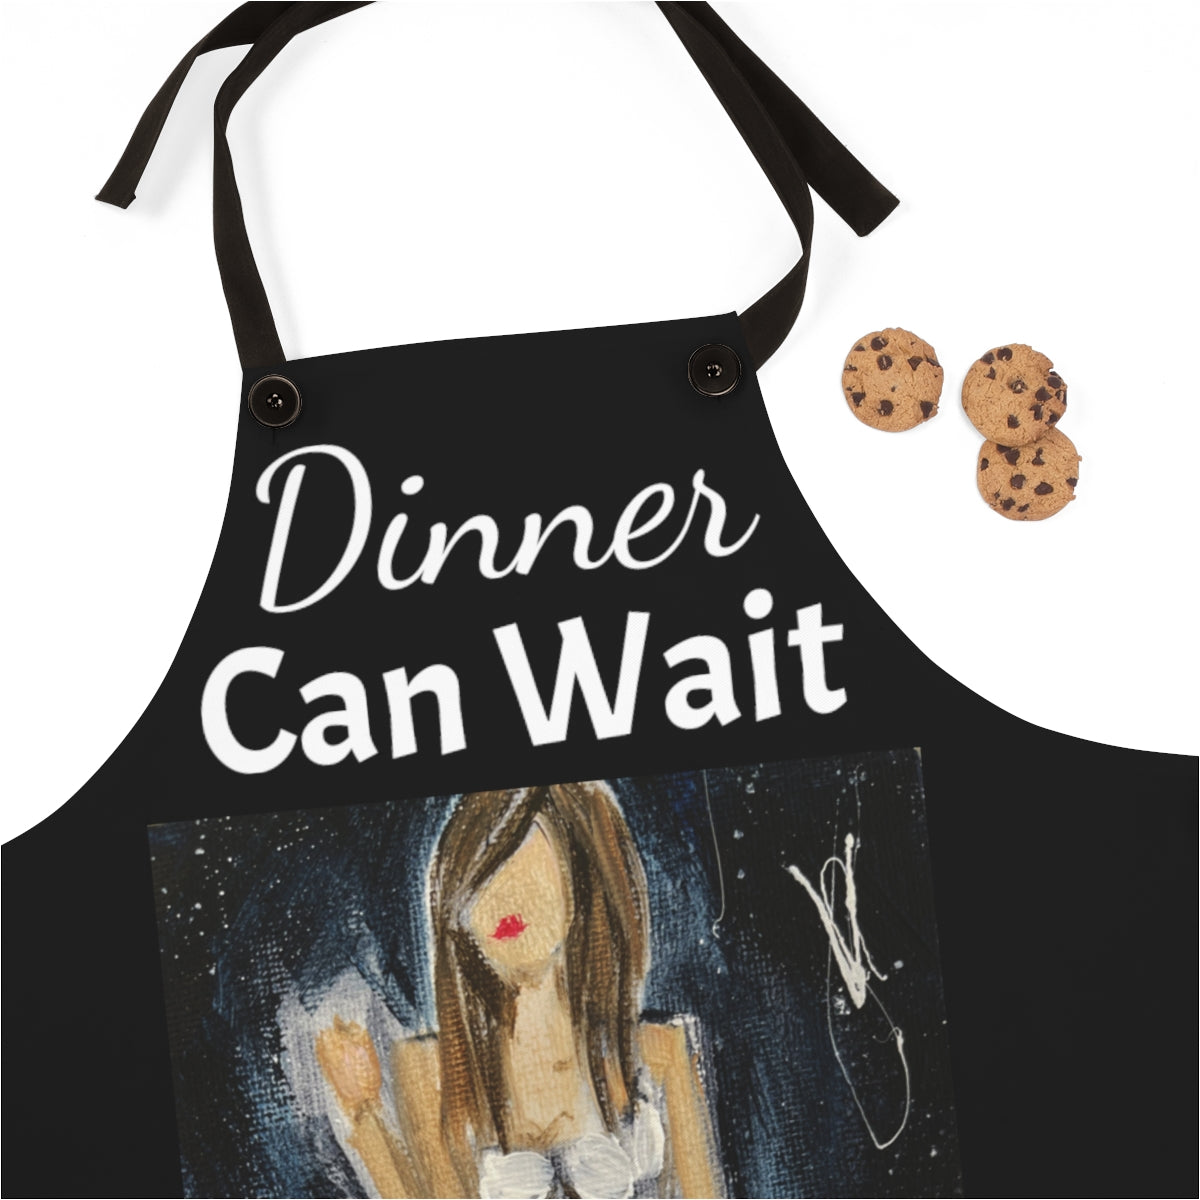 Dinner Can Wait on a Black Kitchen Apron    Sexy Lady in a Nighty